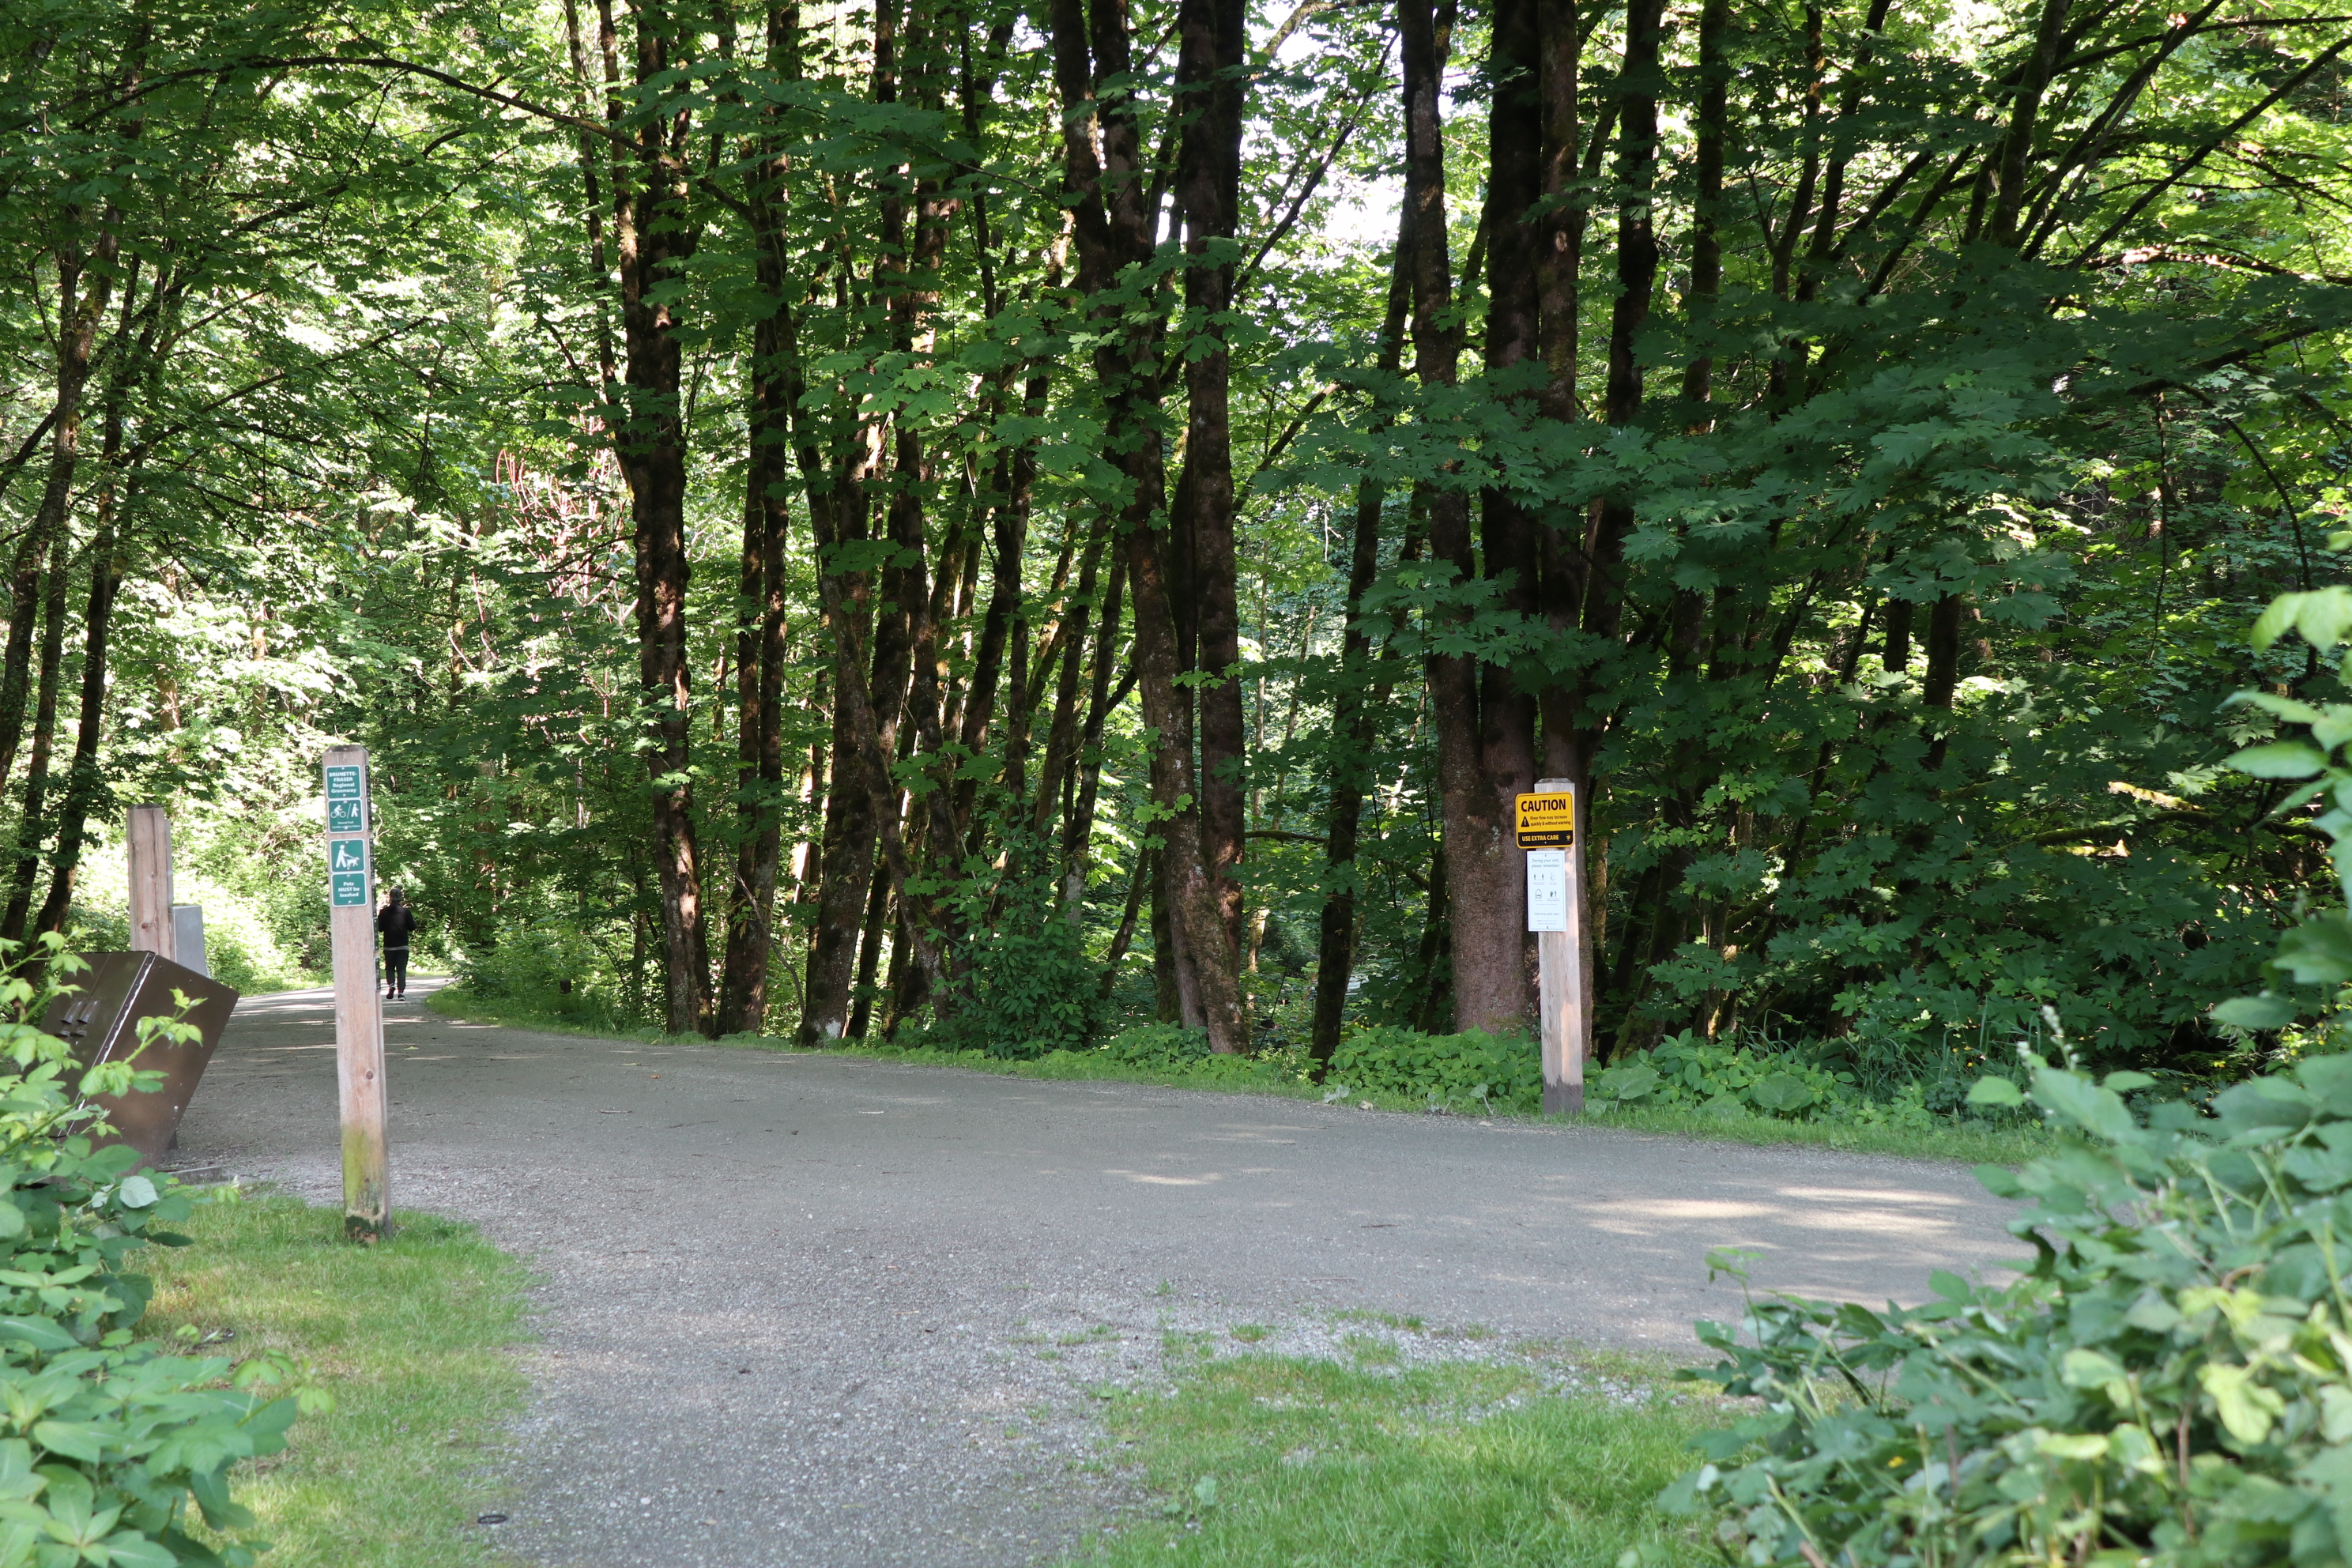 A wide trail with markers indicating directions along with a second trail splitting off.